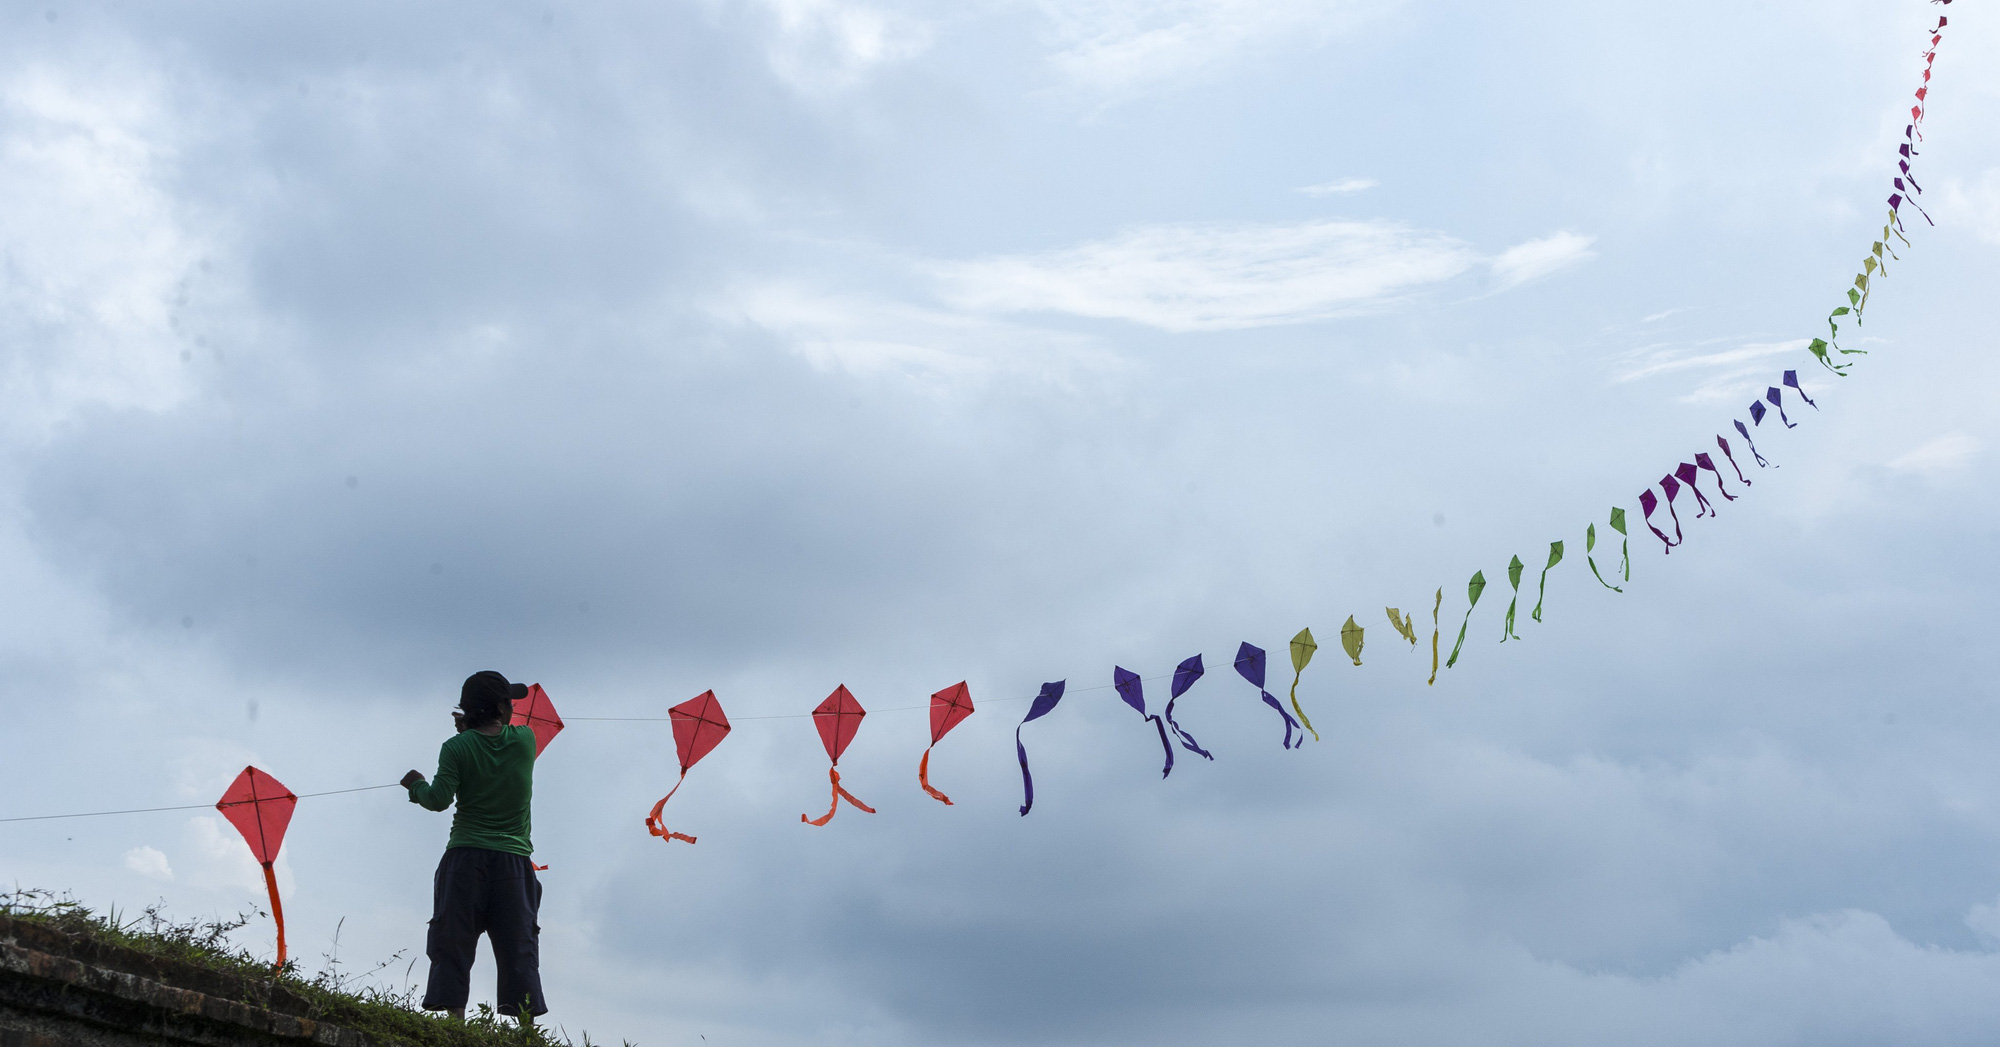 Hue Kite Festival 2022 takes place in 8 days, residents and visitors are spoiled for choice in kite making